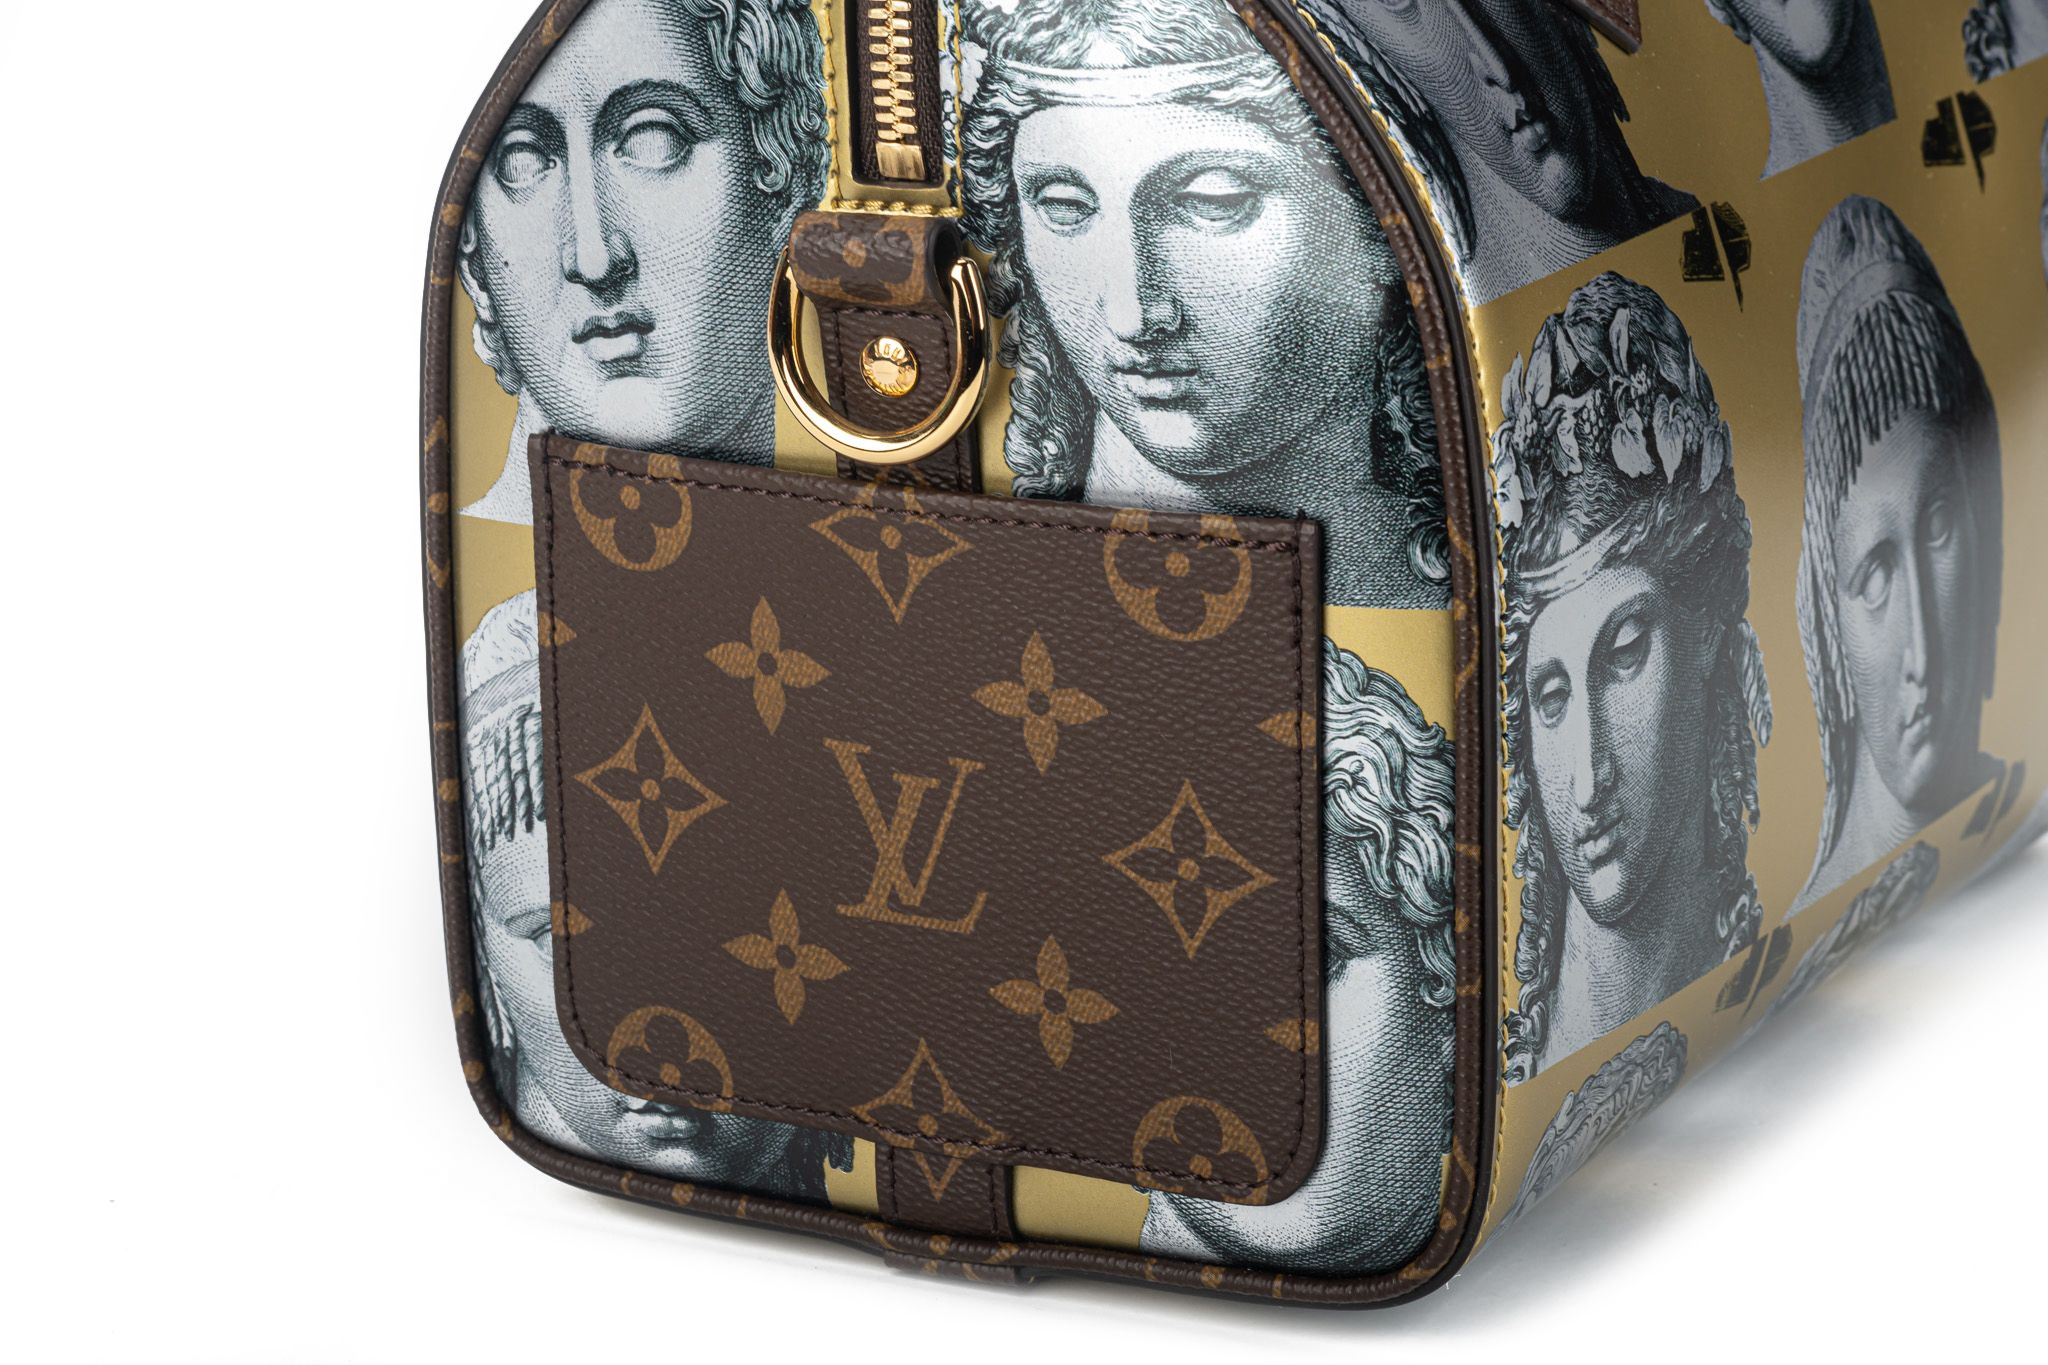 BRAND NEW-Limited edition Louis Vuitton Speedy 25 strap Fornasetti fw21